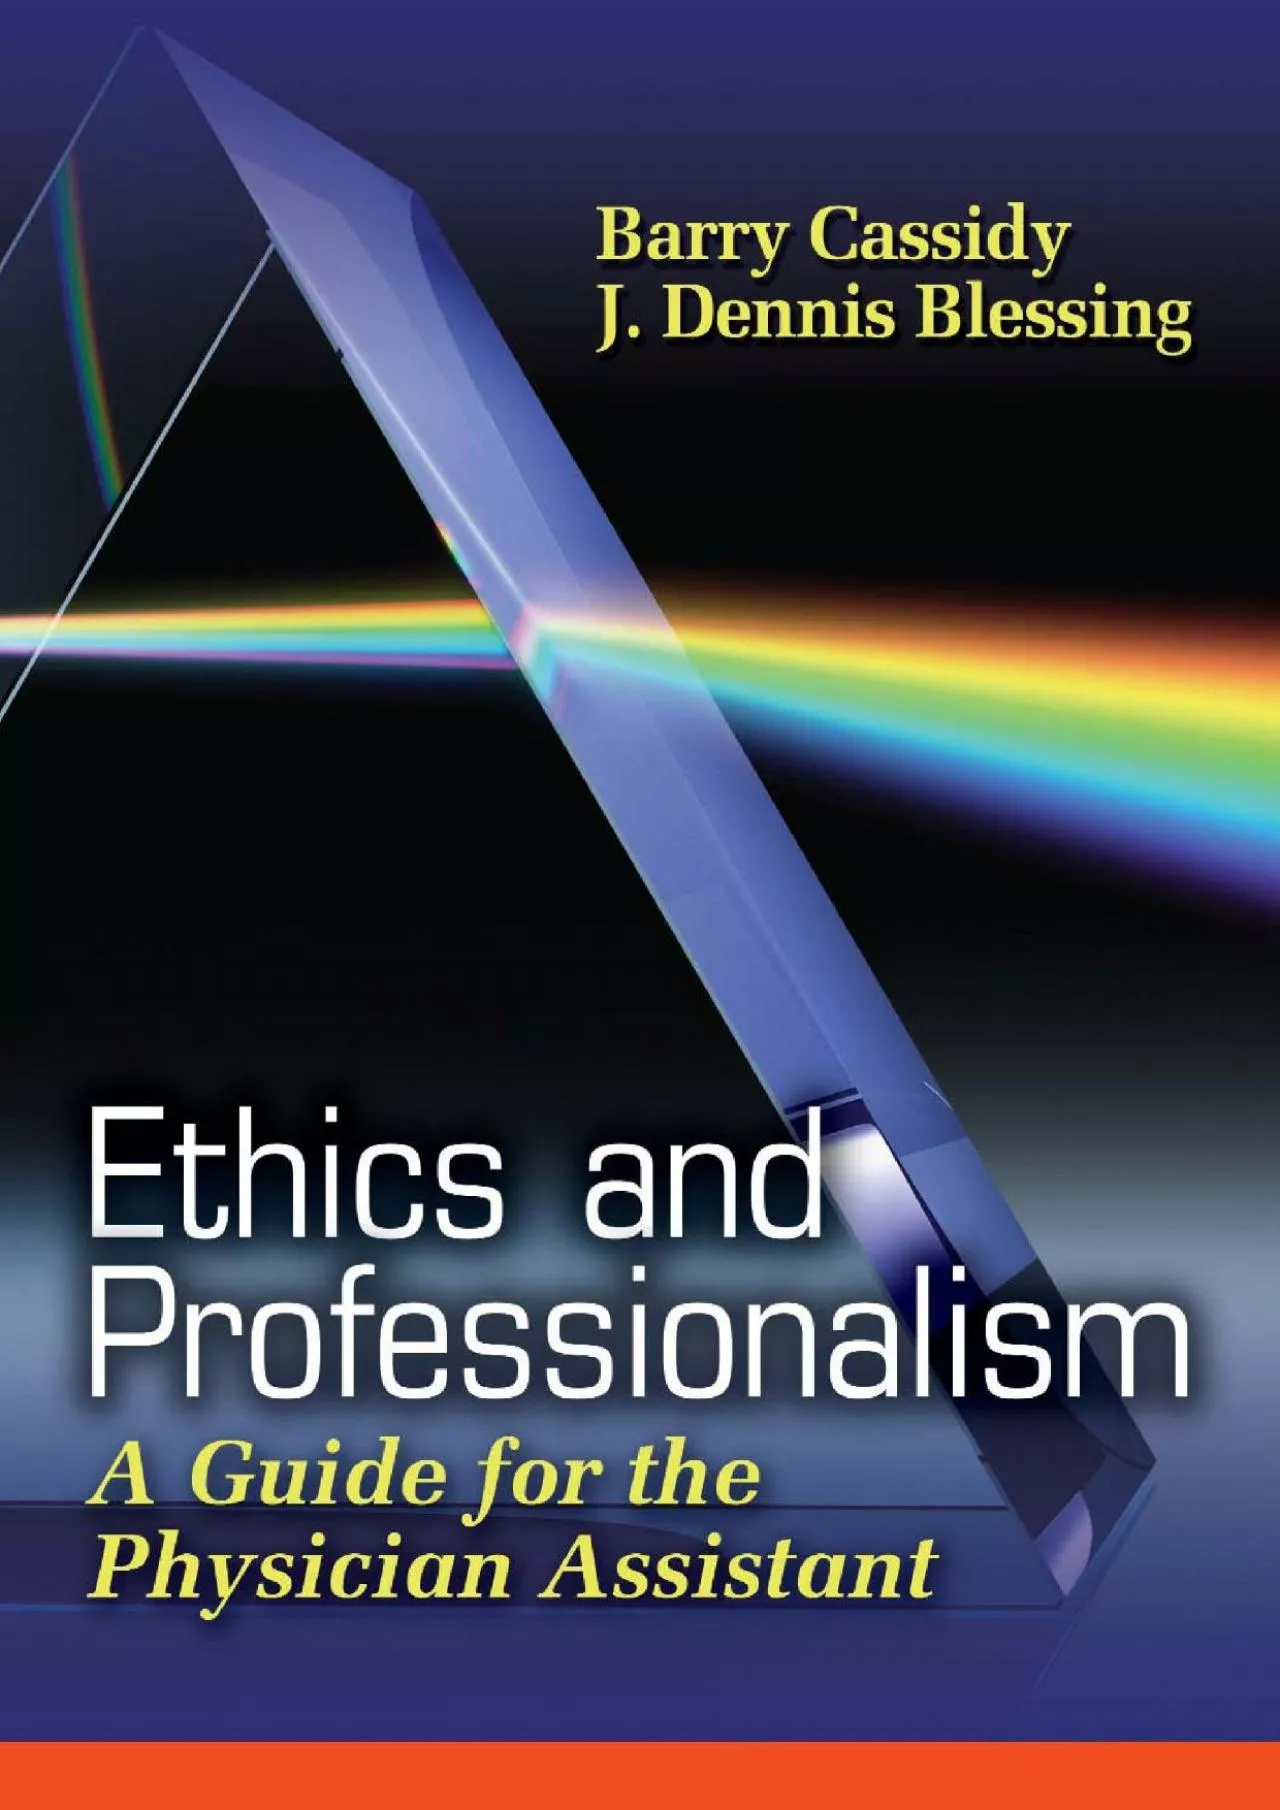 (DOWNLOAD)-Ethics and Professionalism: A Guide for the Physician Assistant